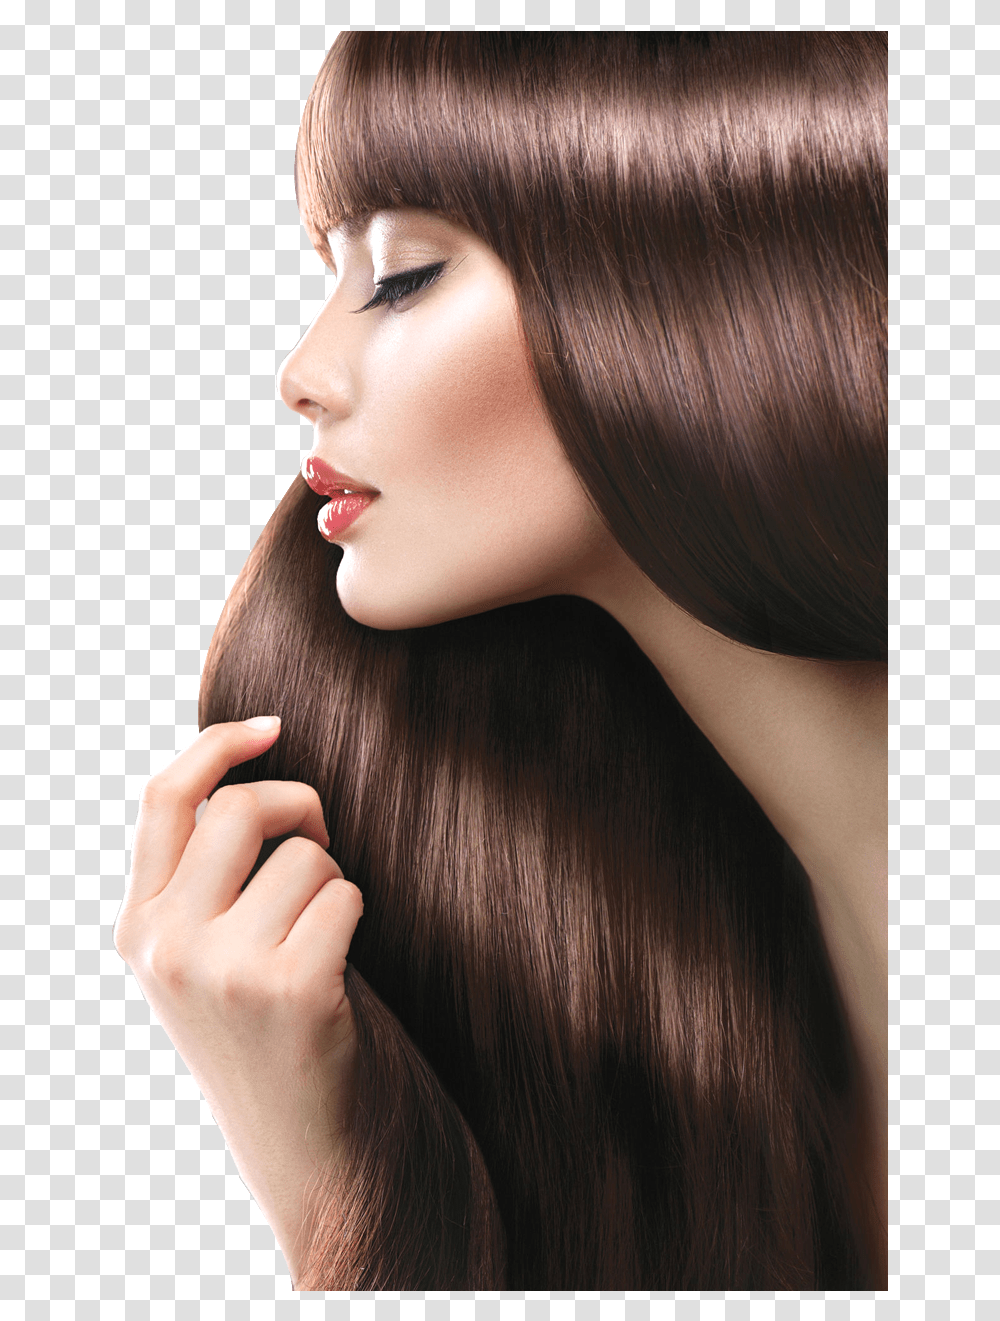 Hair Salon Hd Hair Salon Hd Images Mulher Cabelo Liso, Person, Human, Face, Mouth Transparent Png